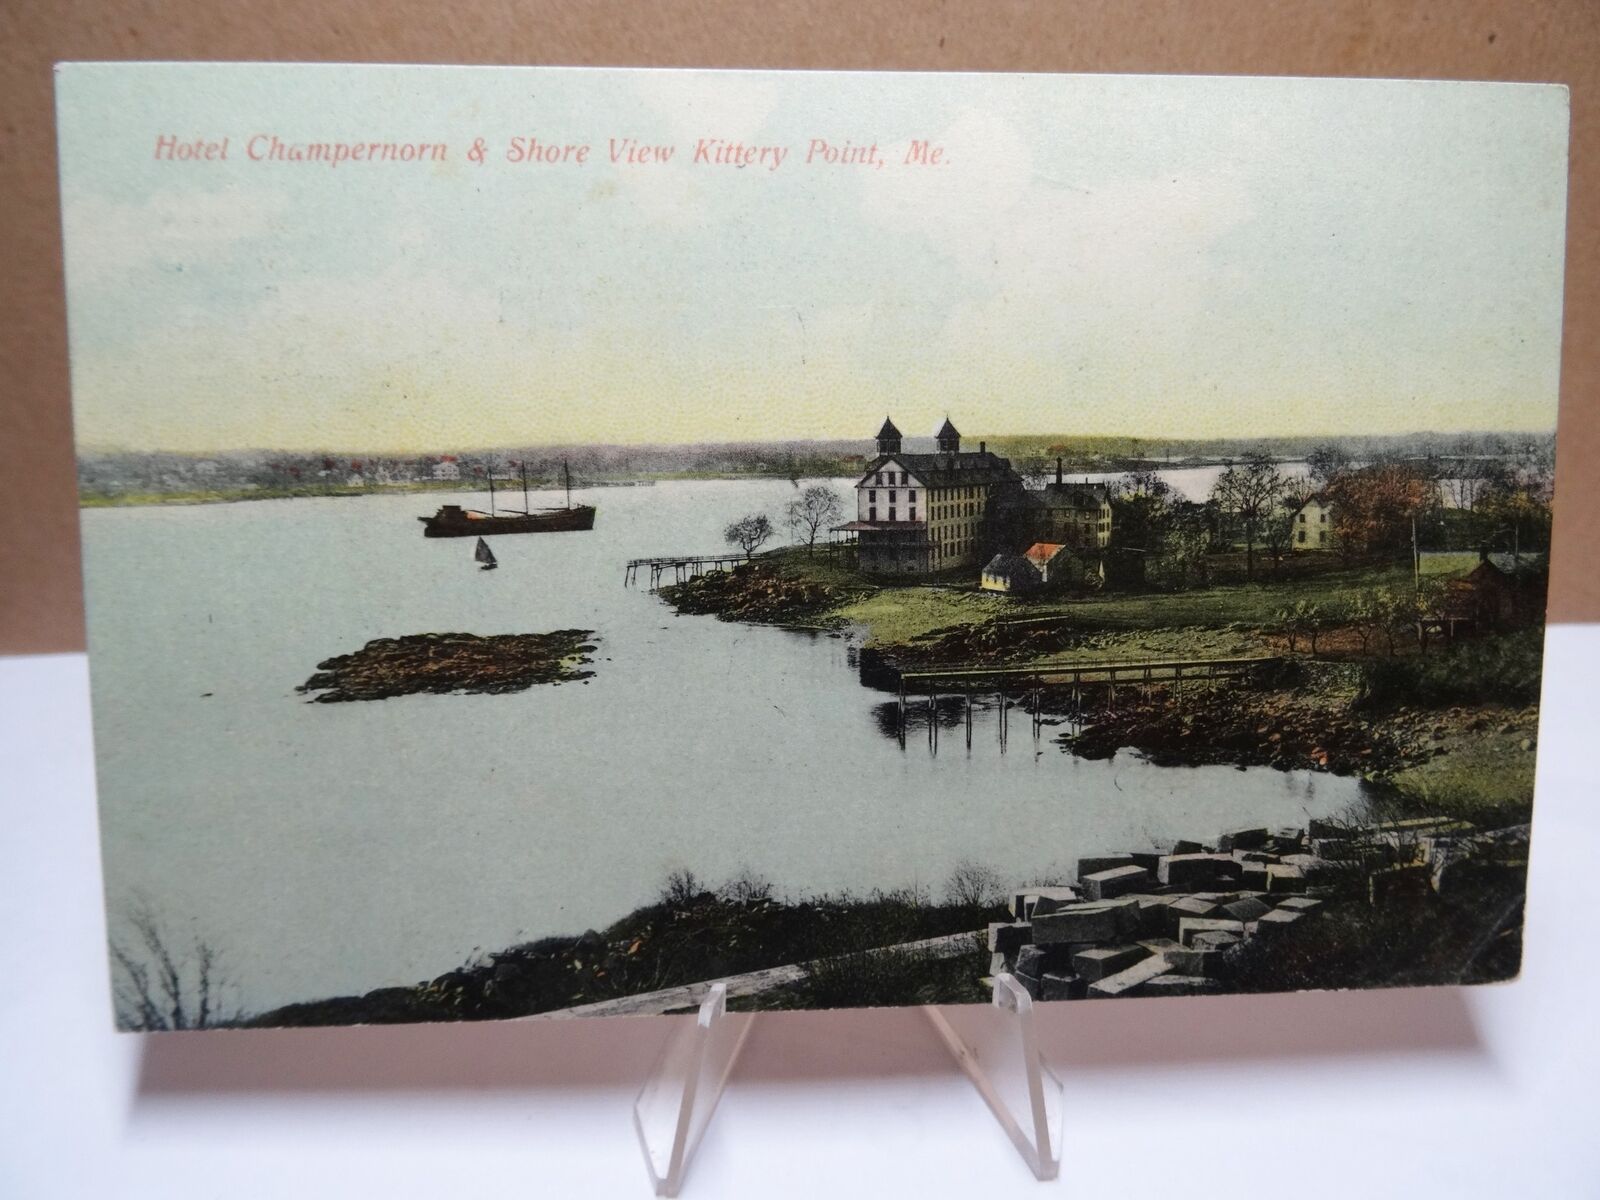 Hotel Champernowne and Shore View, Kittery Point ME Postcard 1908